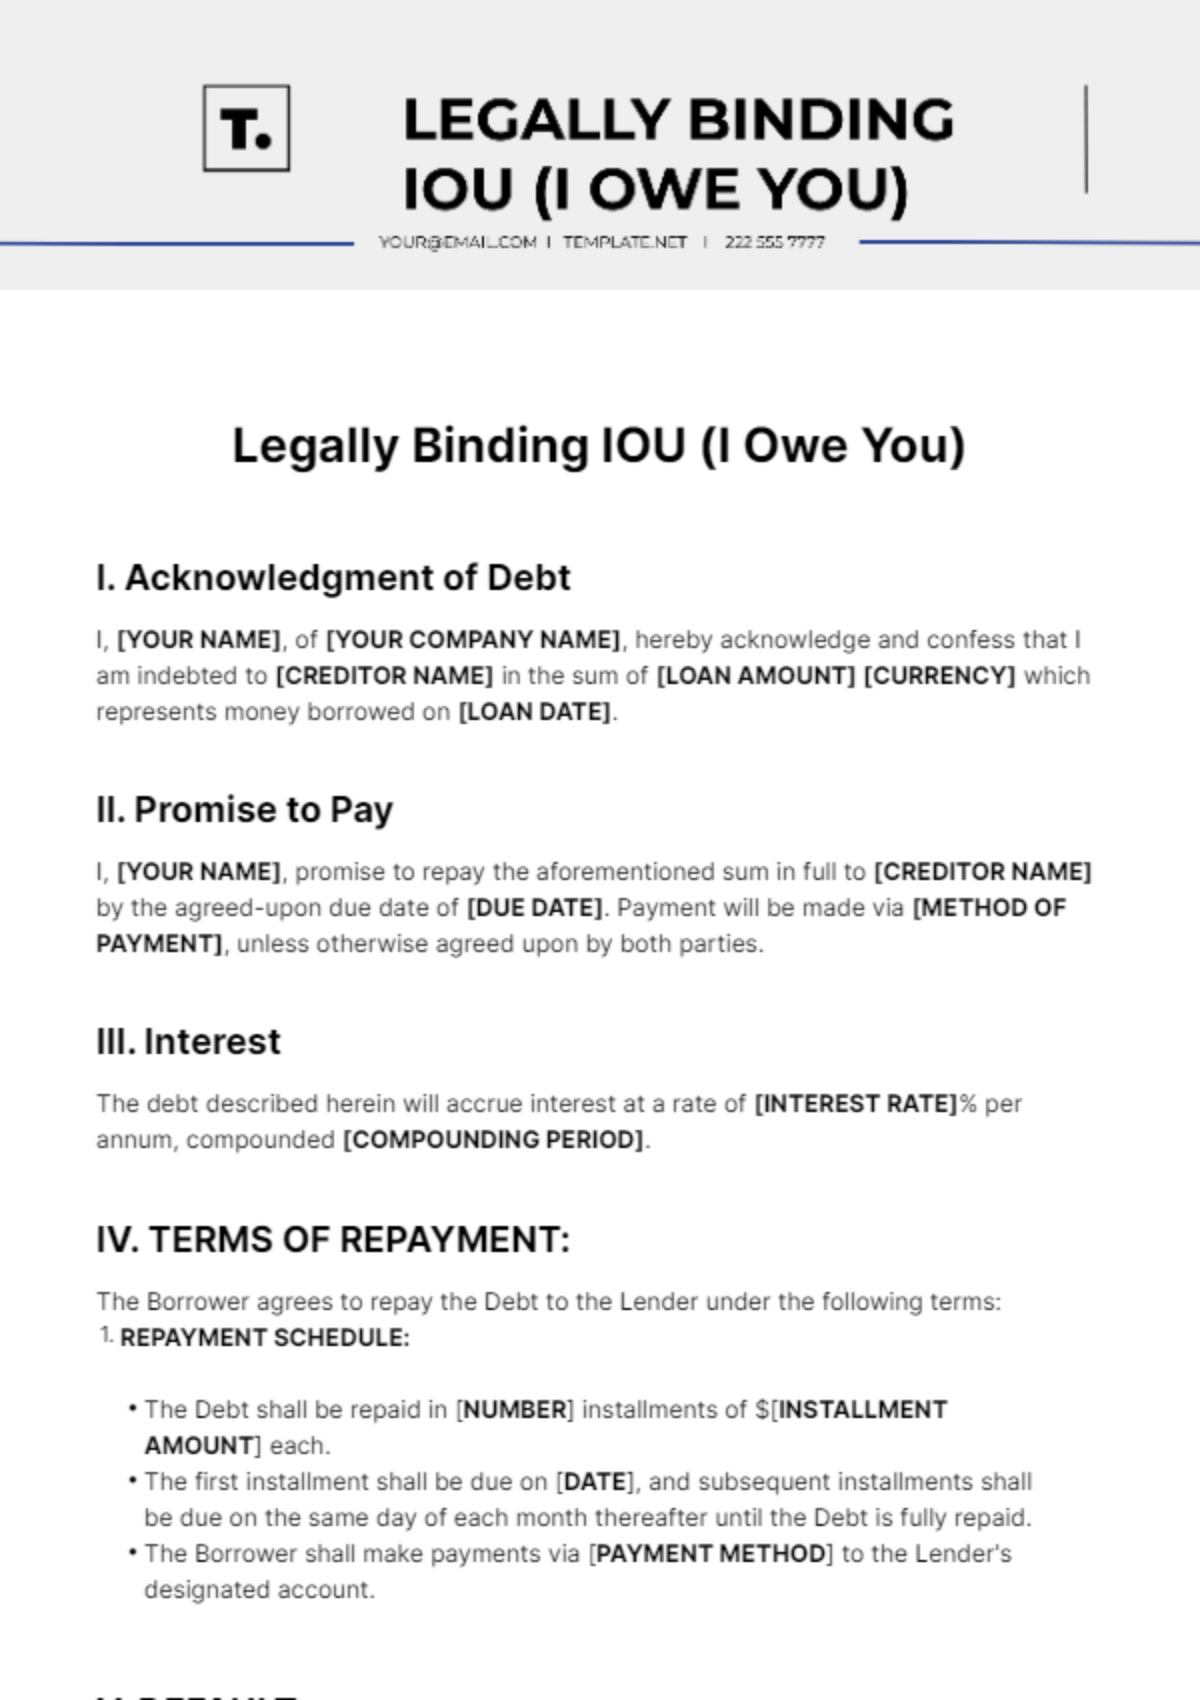 Free Legally Binding IOU Template